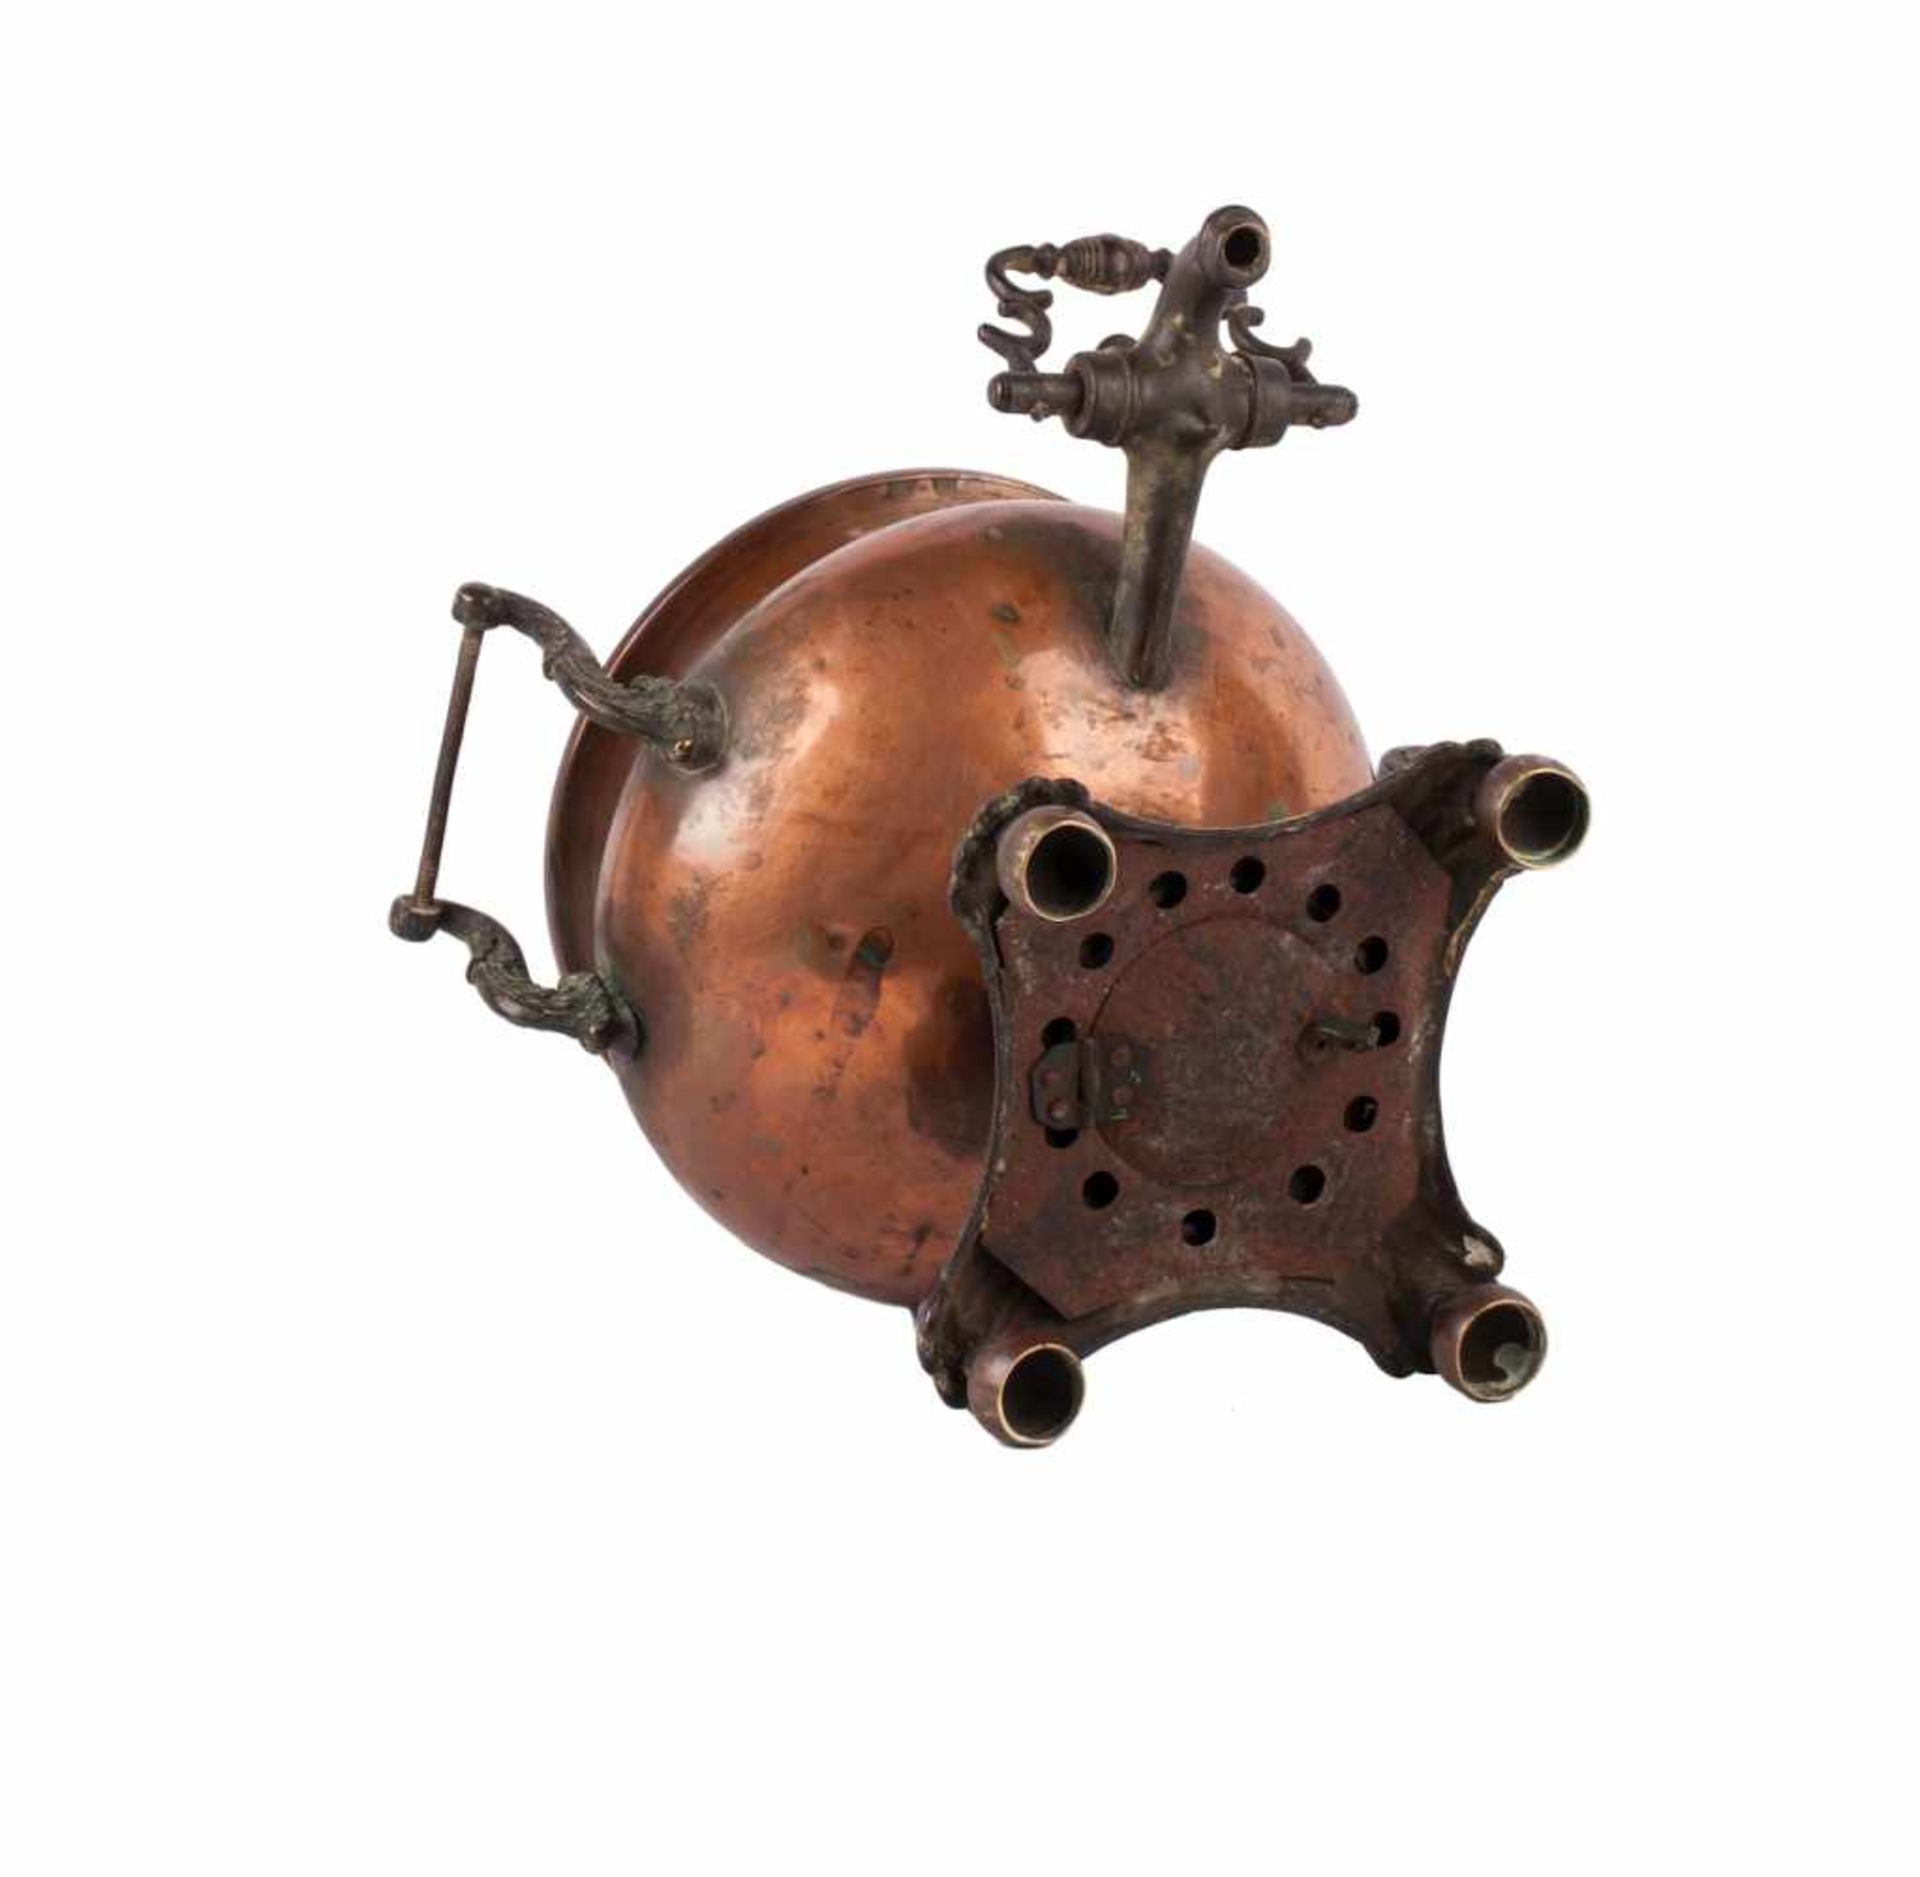 Small samovar in the shape of a vaseSmall samovar in the shape of a vase. Copper, cast, chasing, - Image 6 of 6